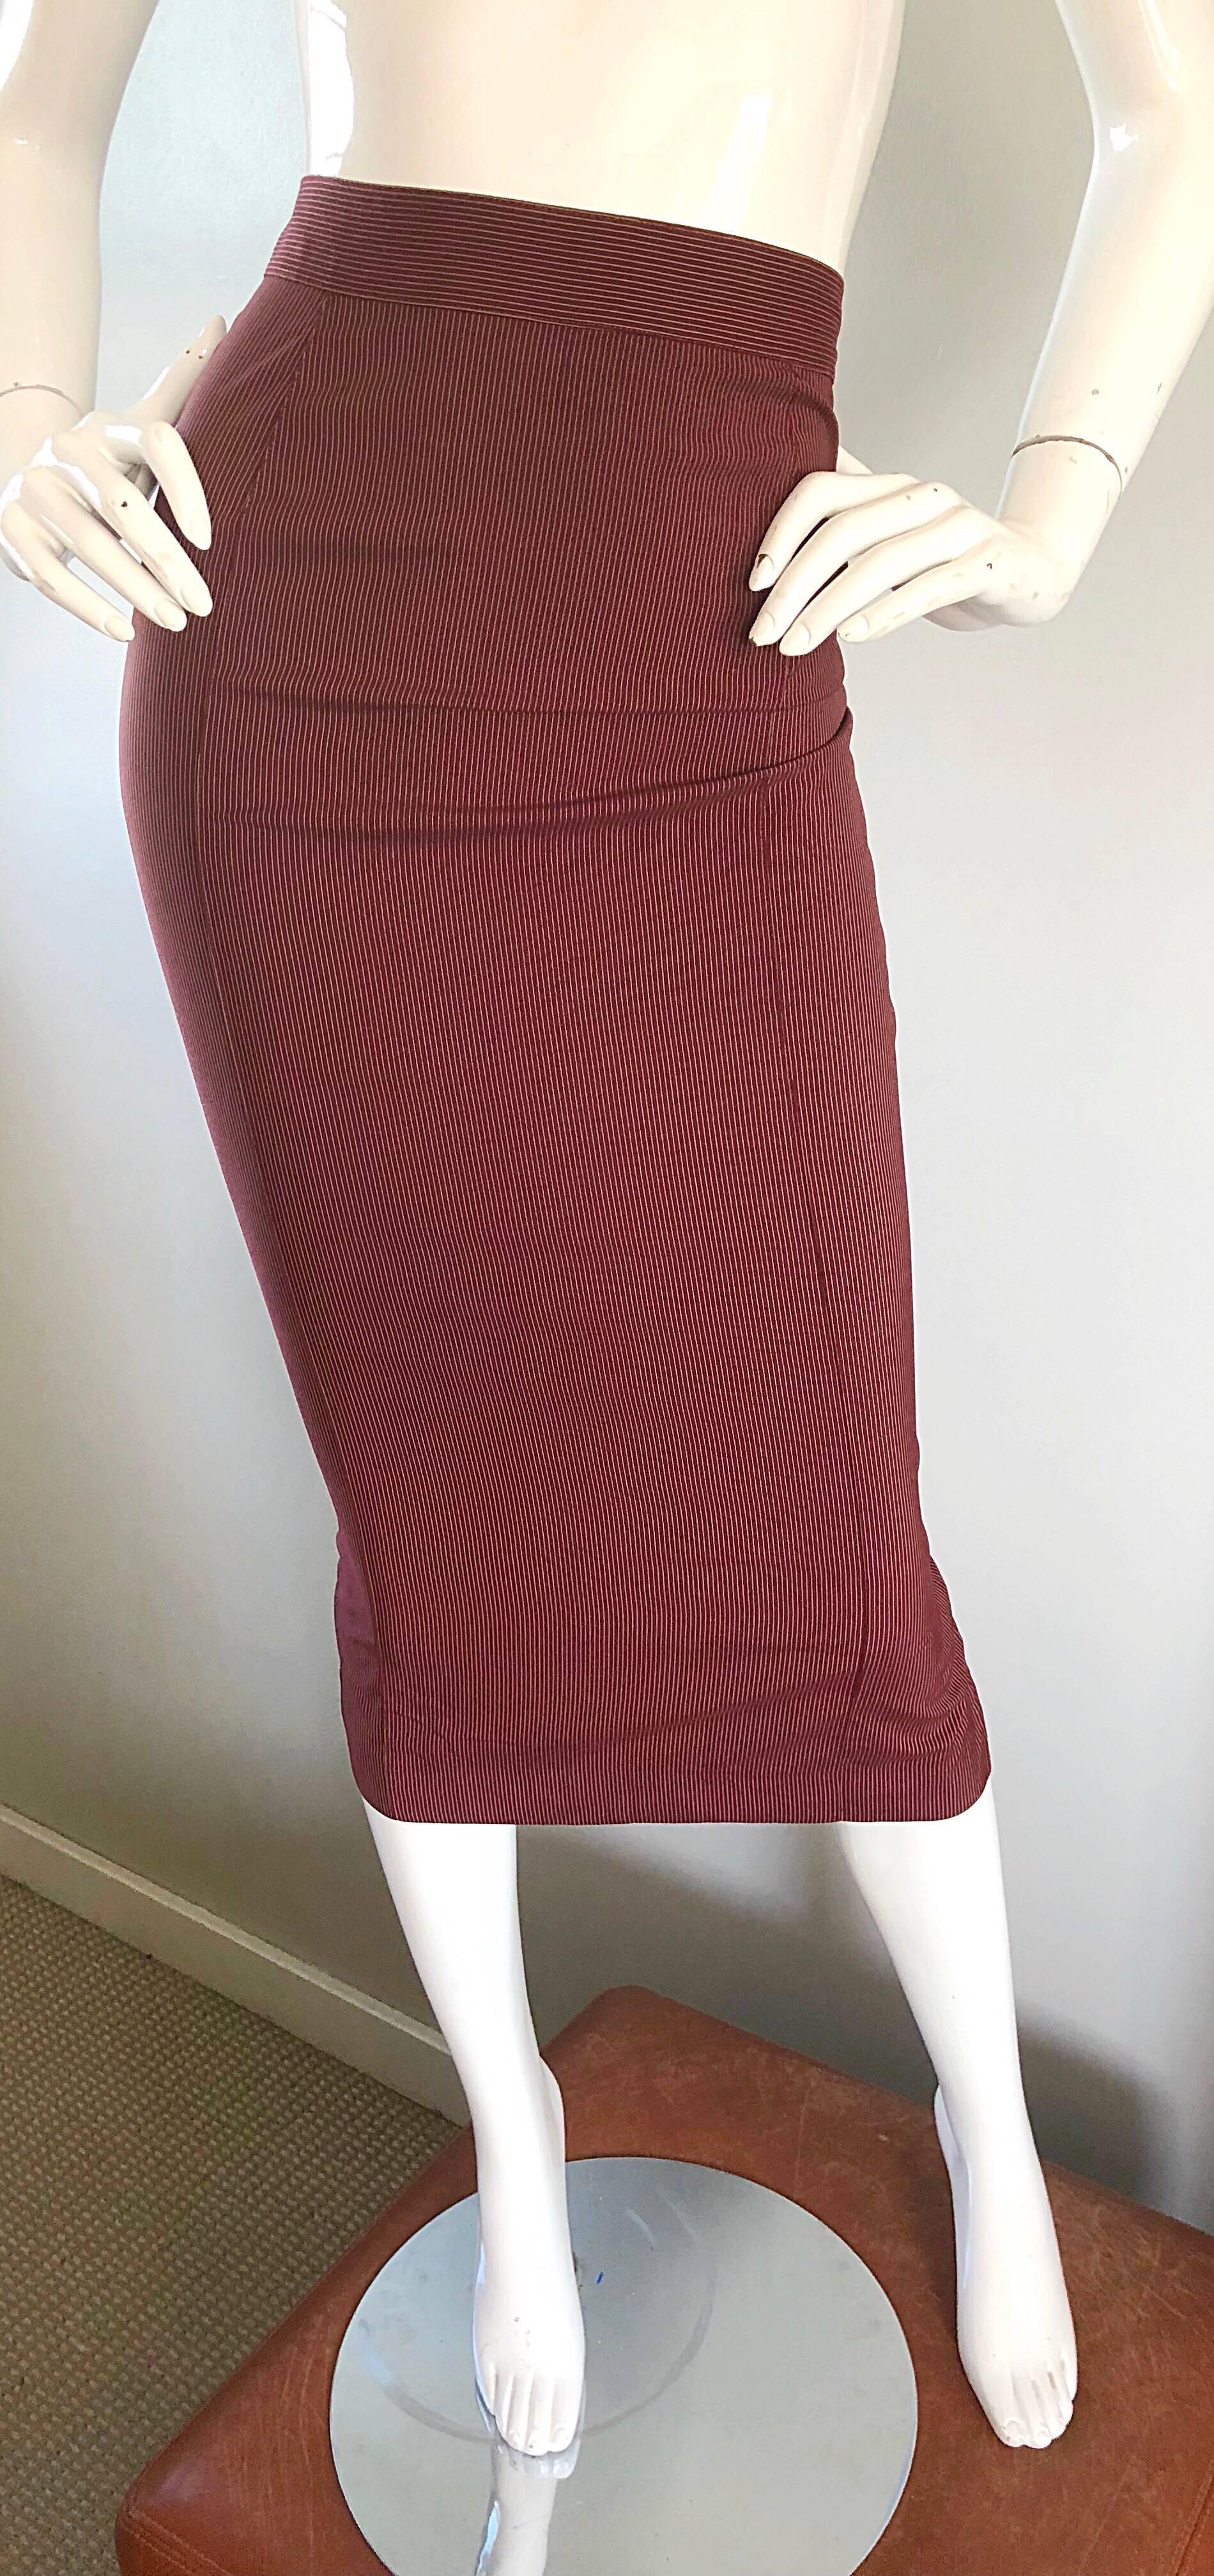 Sexy, yet classic early 1990s vintage JEAN PAUL GAULTIER burgundy / maroon pinstriped high waisted bodycon pencil skirt! Same one worn by Madonna on the 